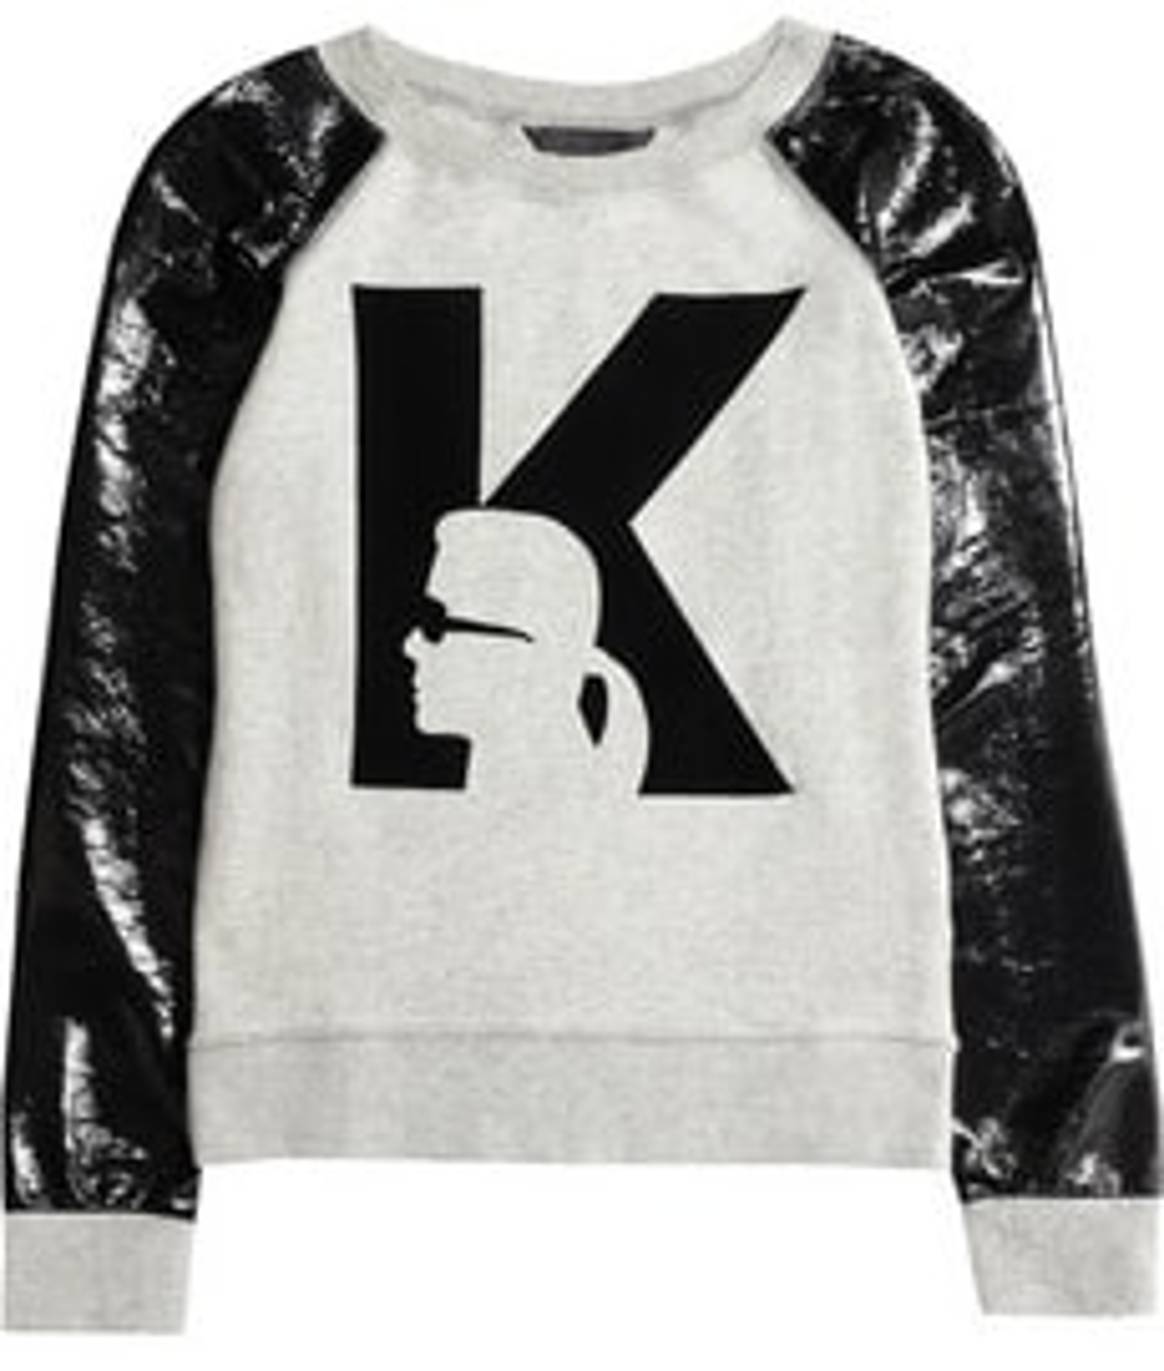 Coming soon, une boutique Karl Lagerfeld